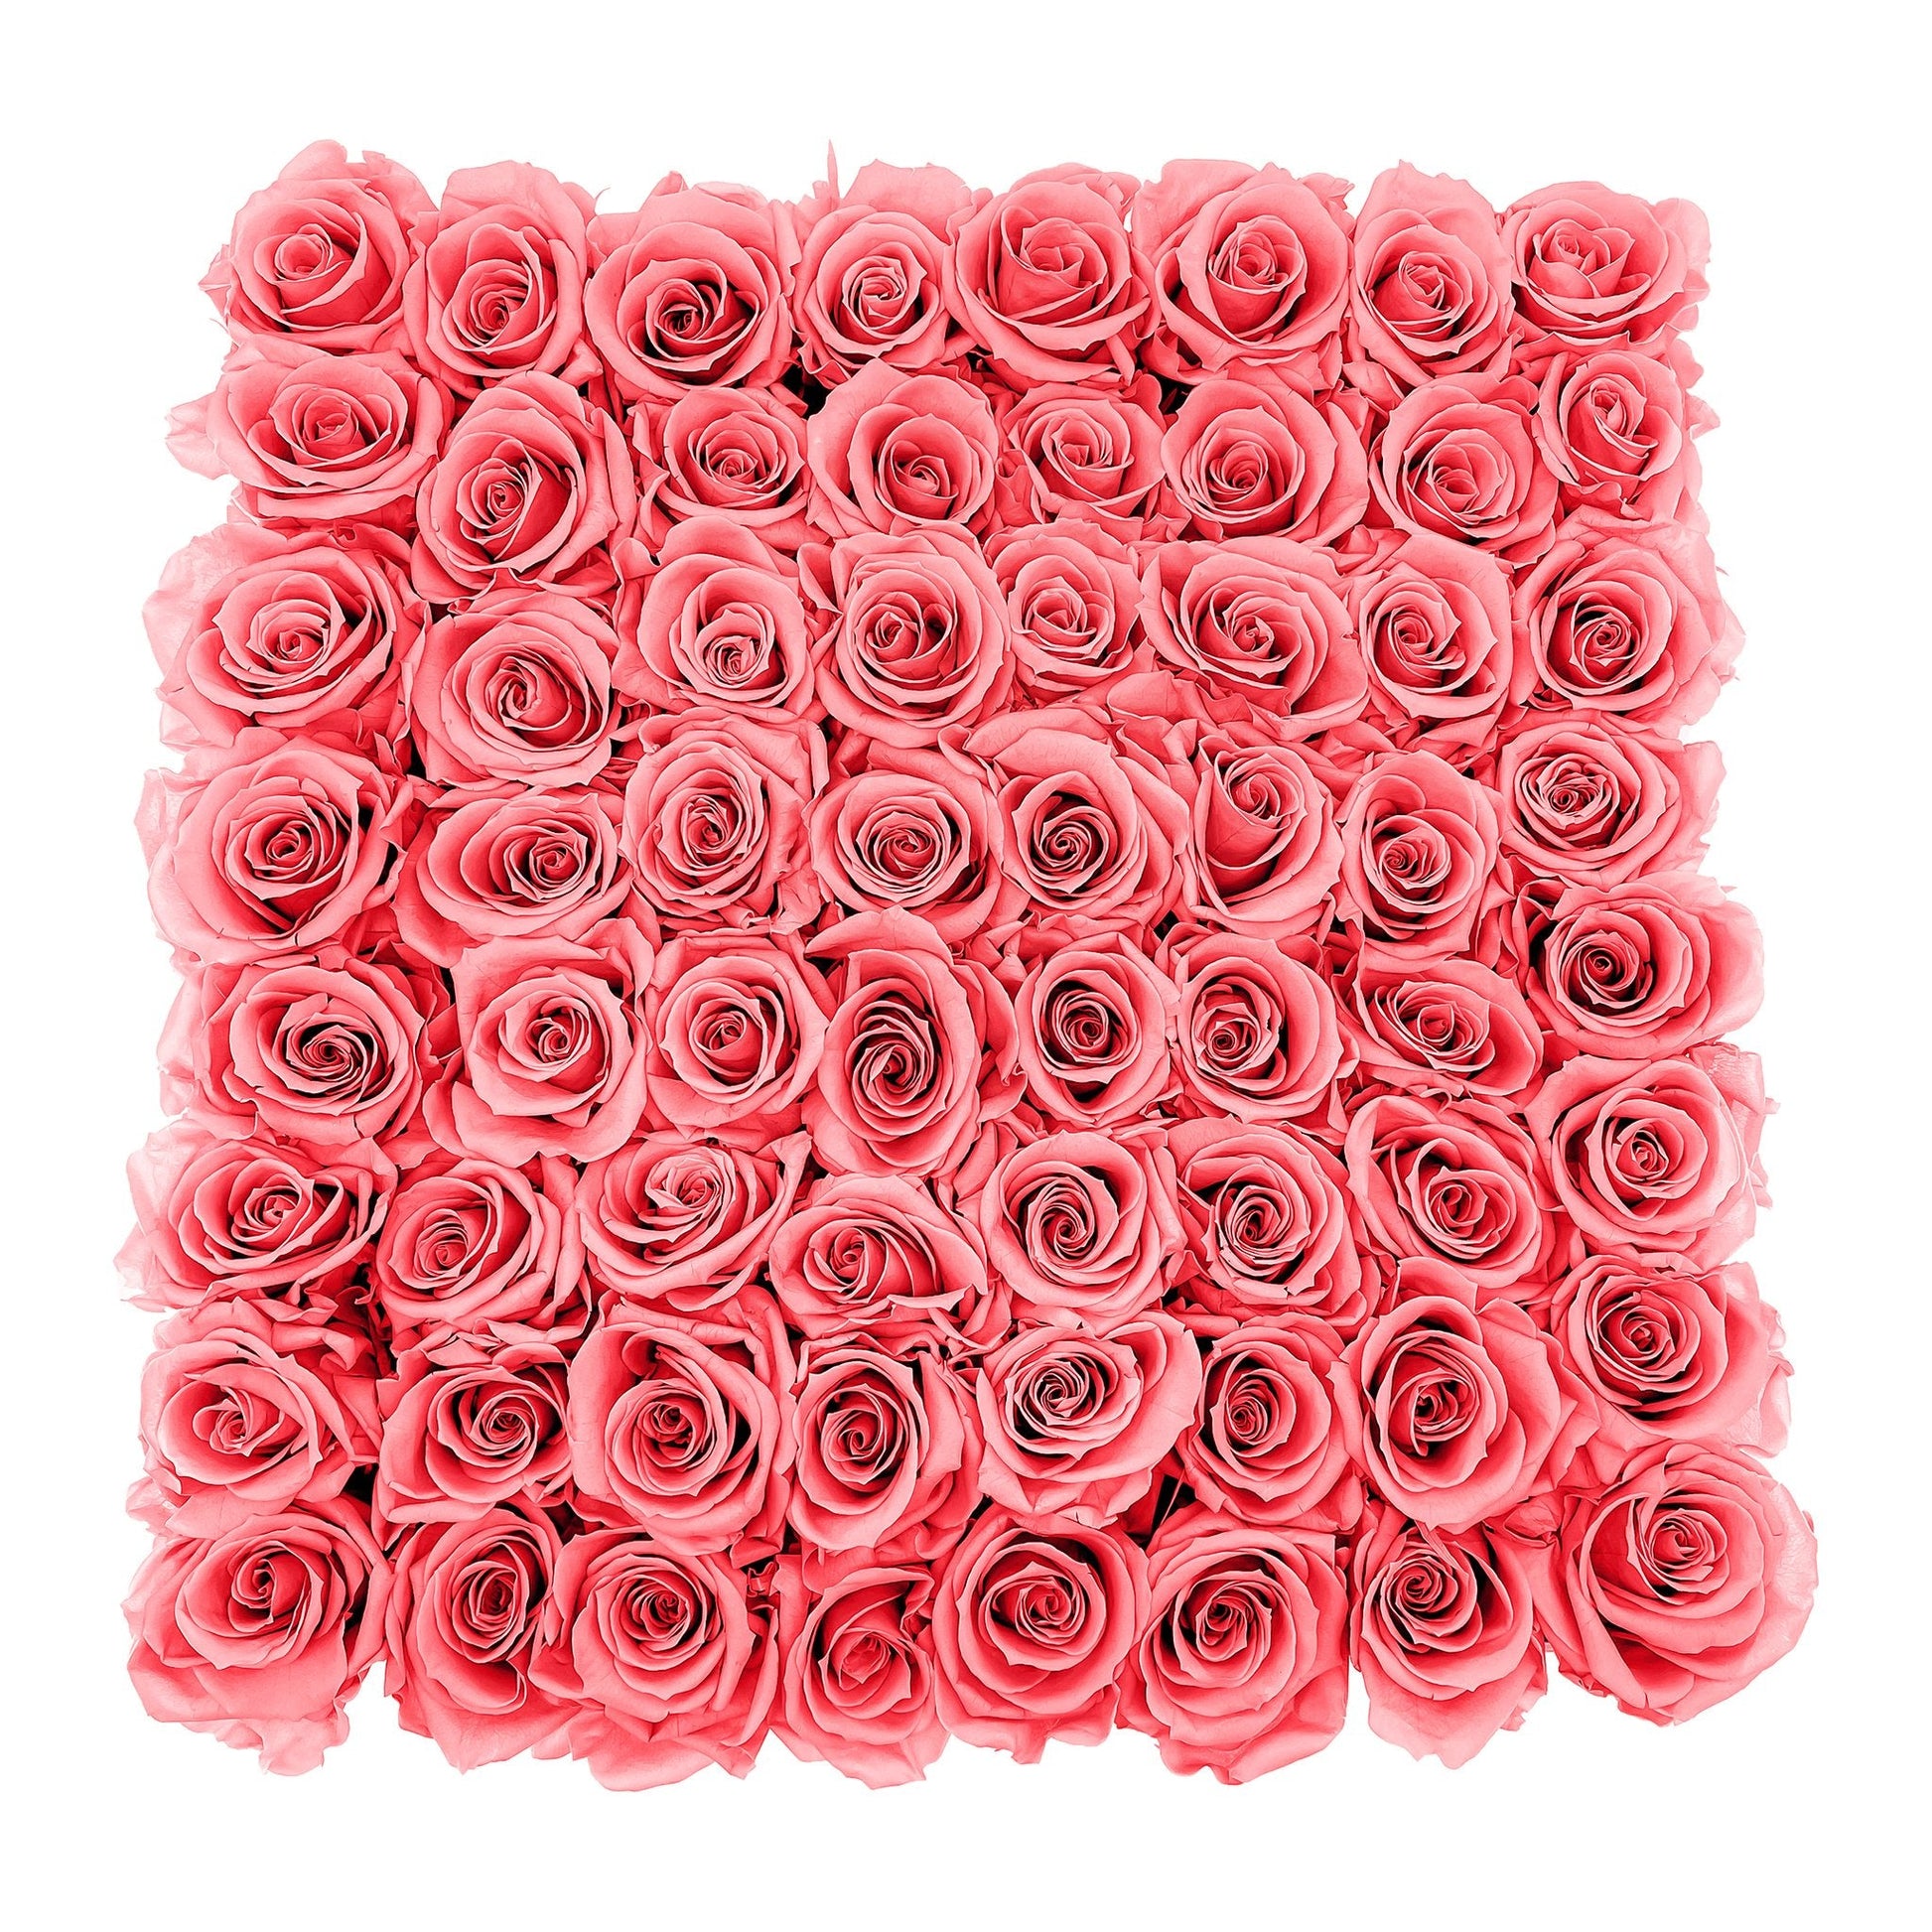 Preserved Roses Large Box | Cherry Blossom - Roses - Queens Flower Delivery